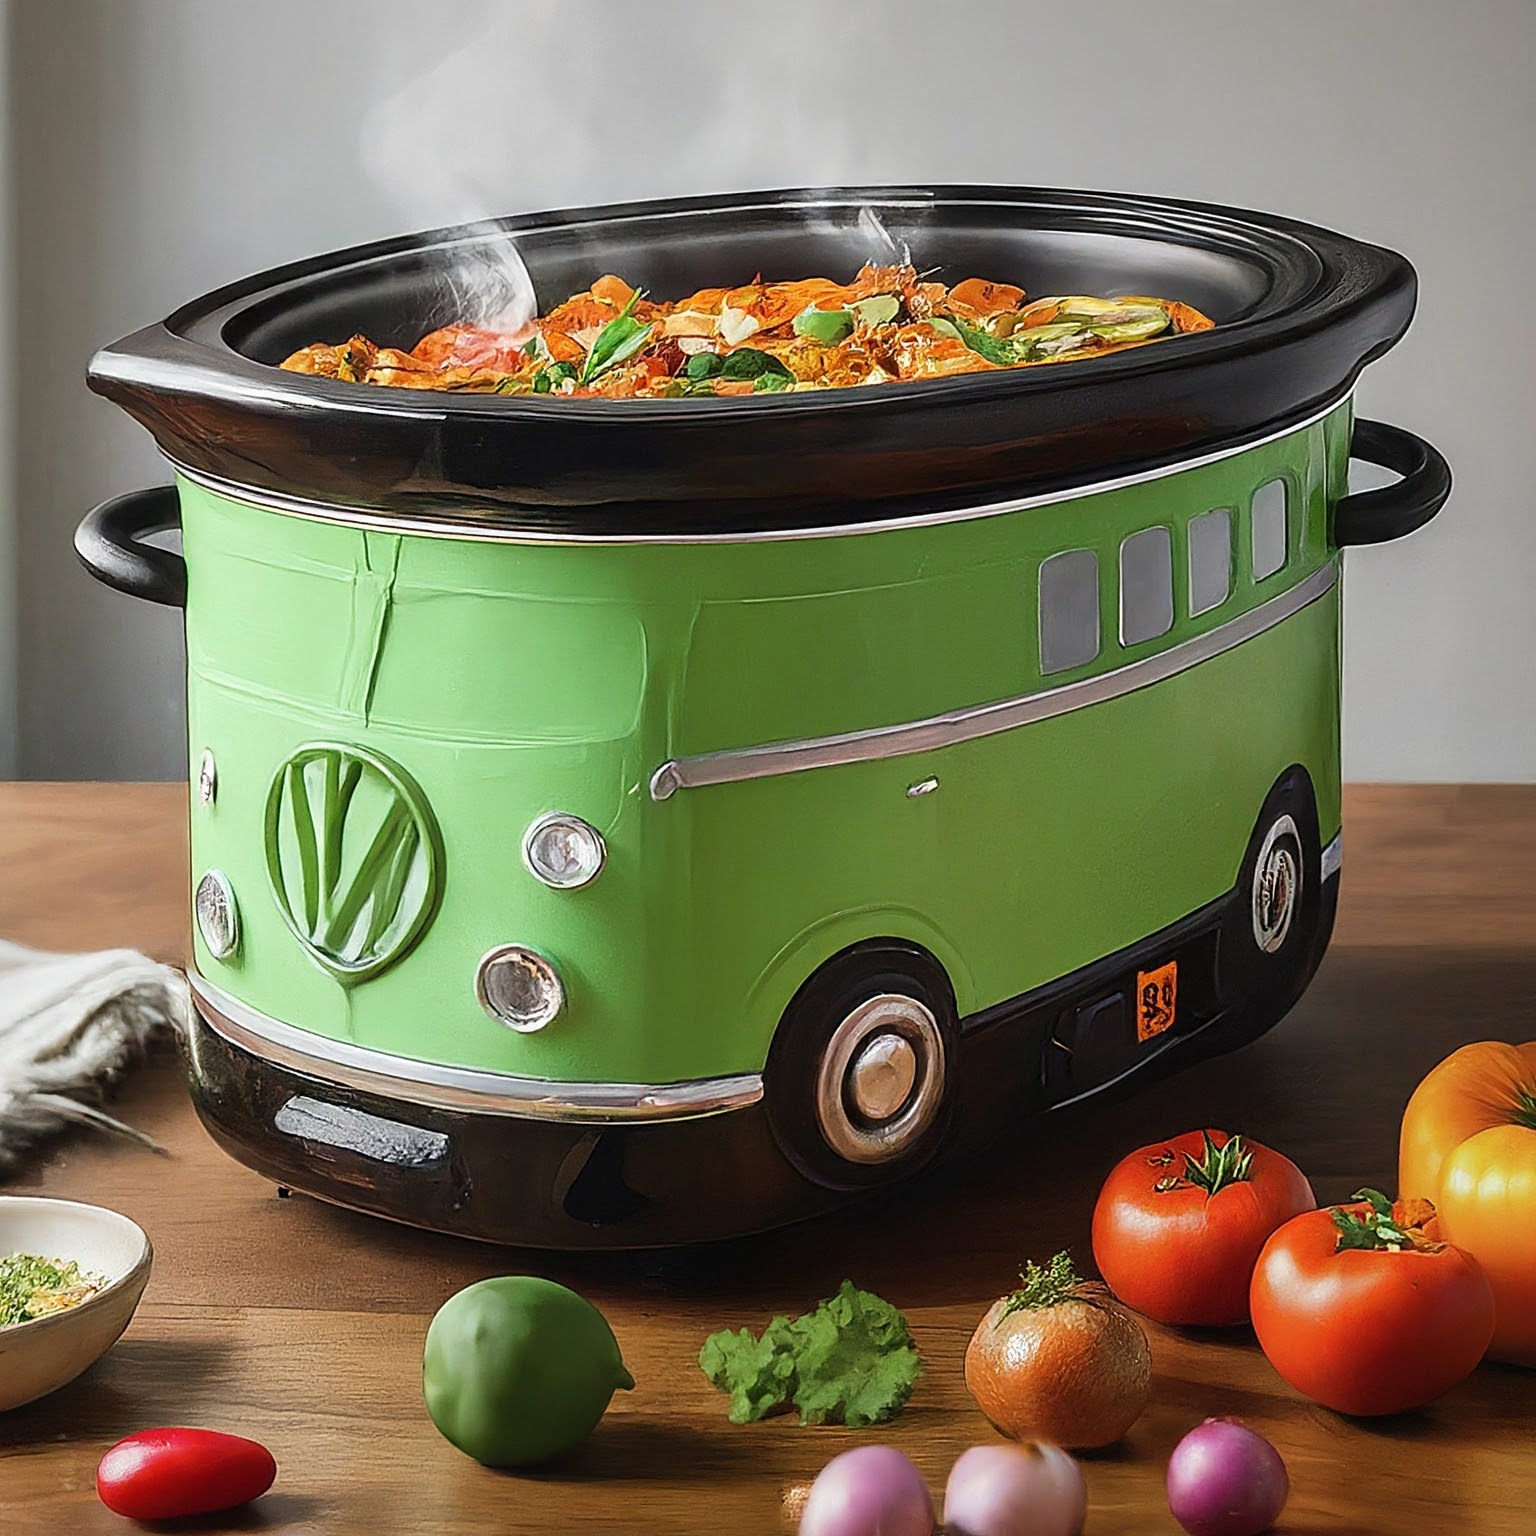 Volkswagen Bus Shaped Slow Cookers: Infusing Retro Vibes into Your Kitchen Adventure luxarts volkswagen bus slow cookers 11